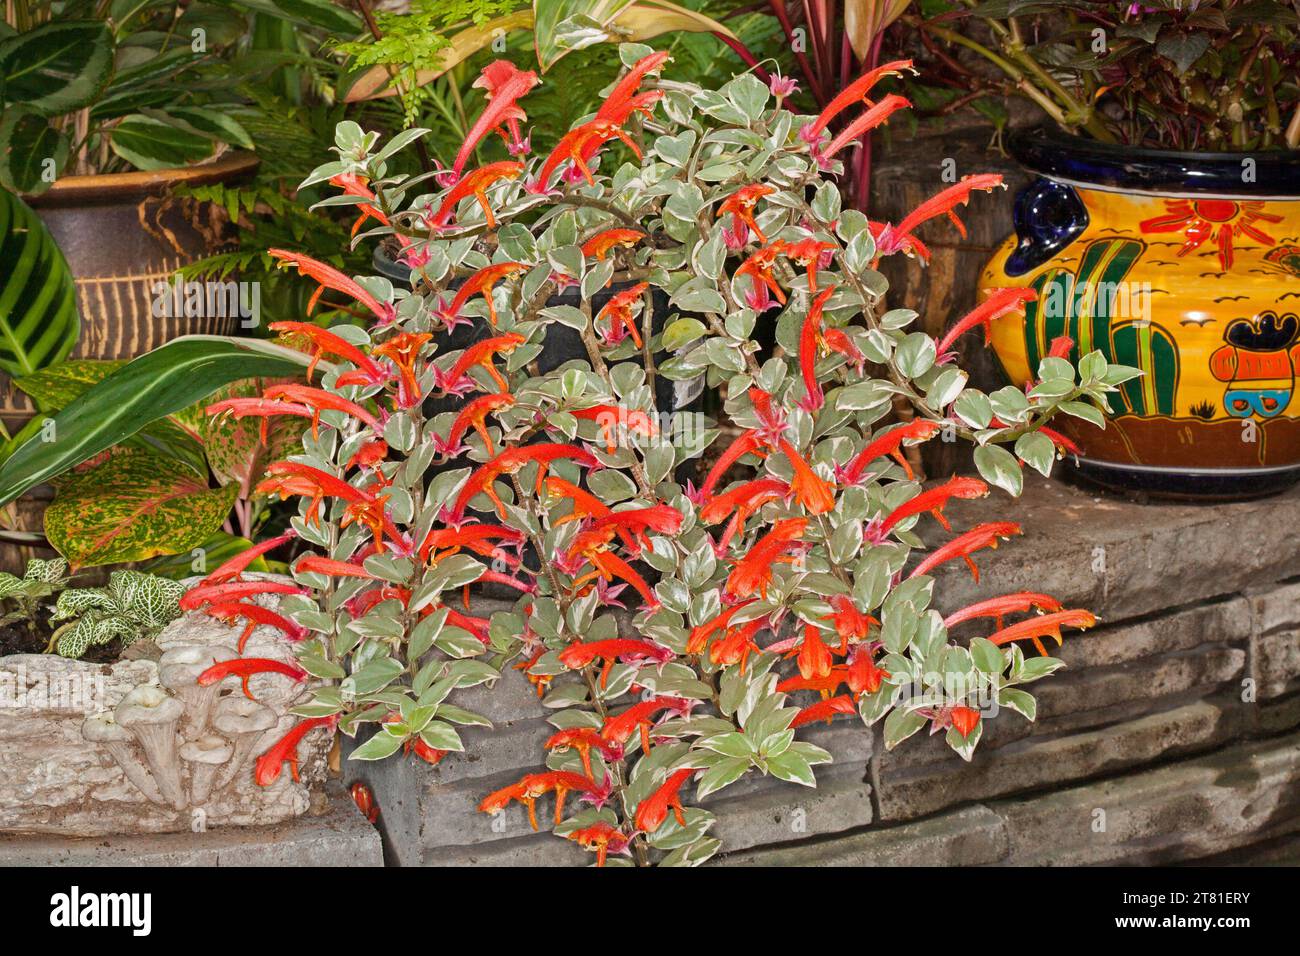 Columnea hirta variegata, Goldfish Plant, covered with masses of vivid orange flowers, growing in a container in Australia. Stock Photo